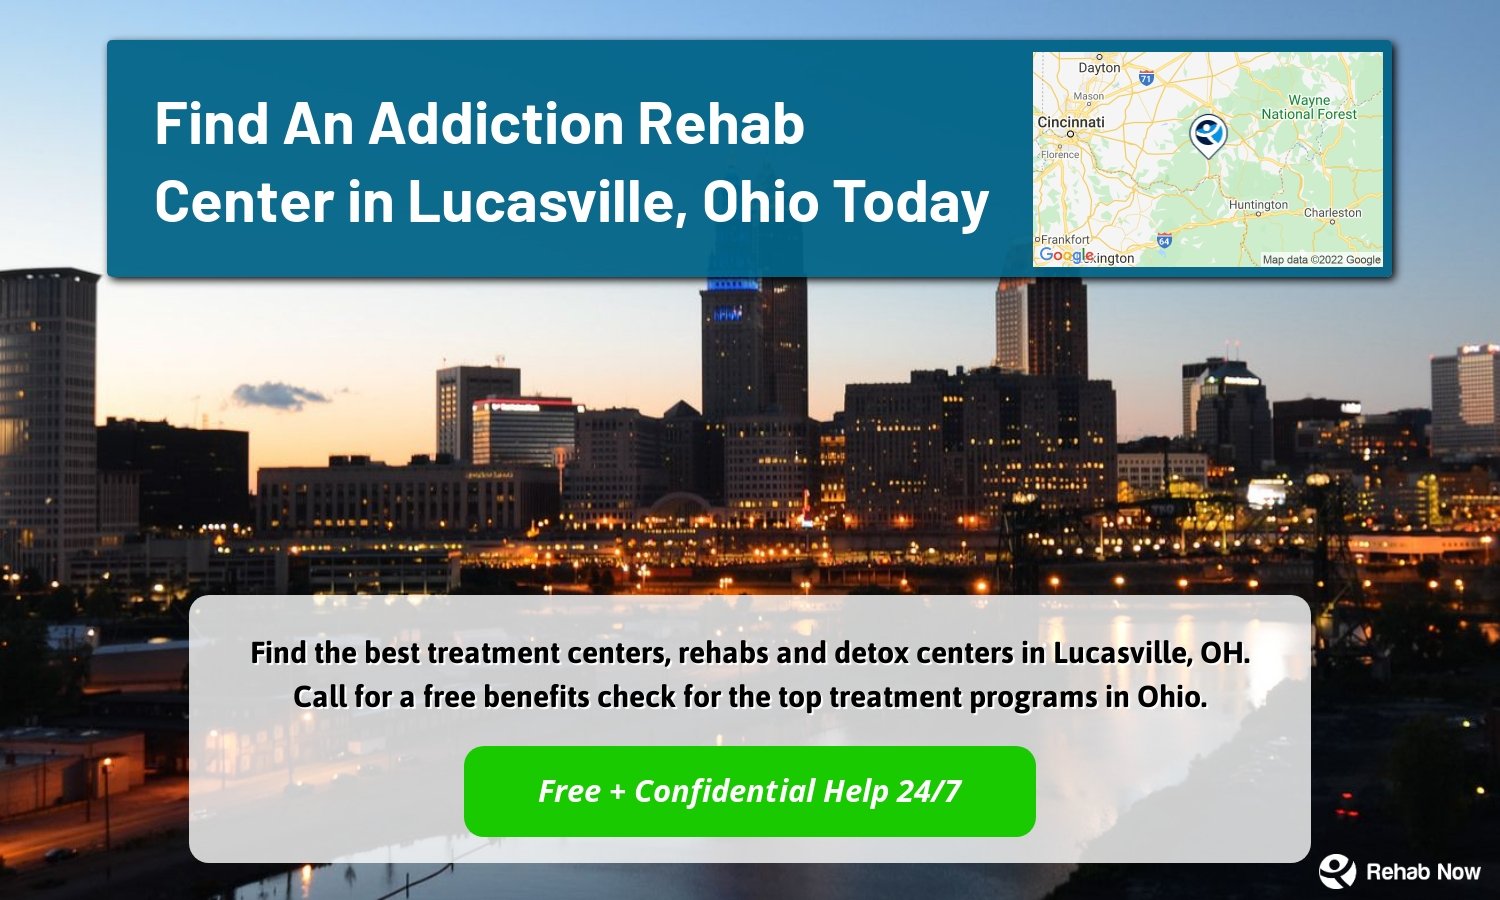 Find the best treatment centers, rehabs and detox centers in Lucasville, OH. Call for a free benefits check for the top treatment programs in Ohio.